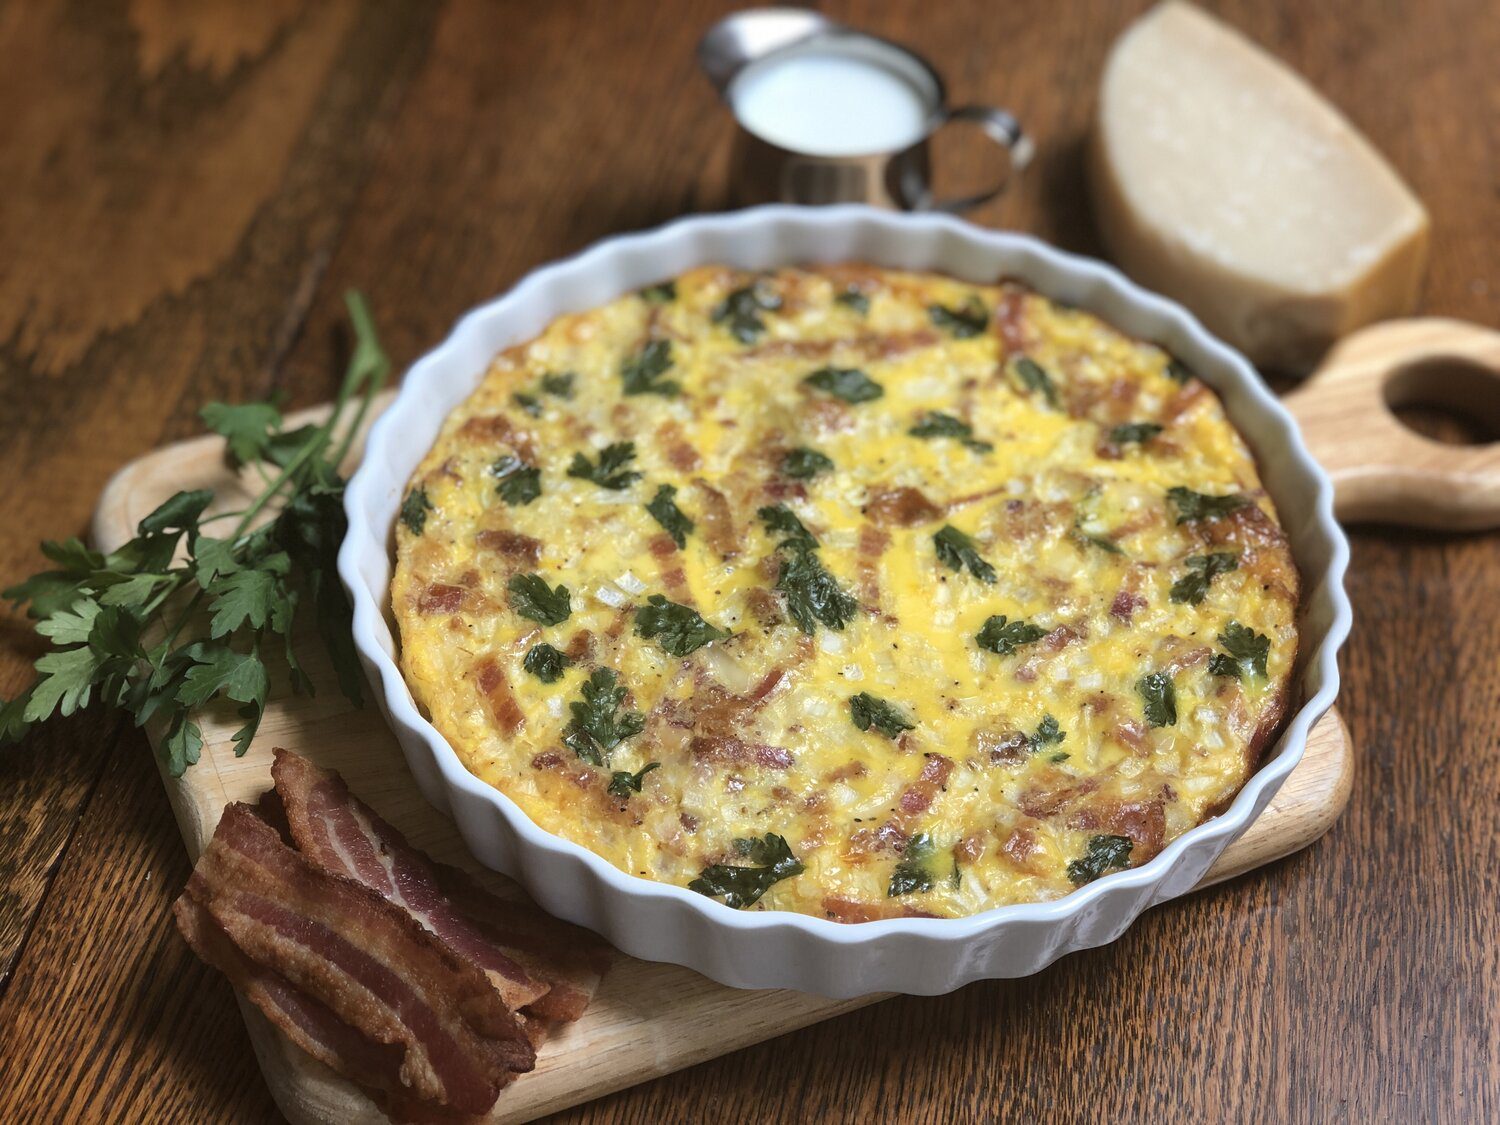 A quiche dish filled with bacon crustless quiche.